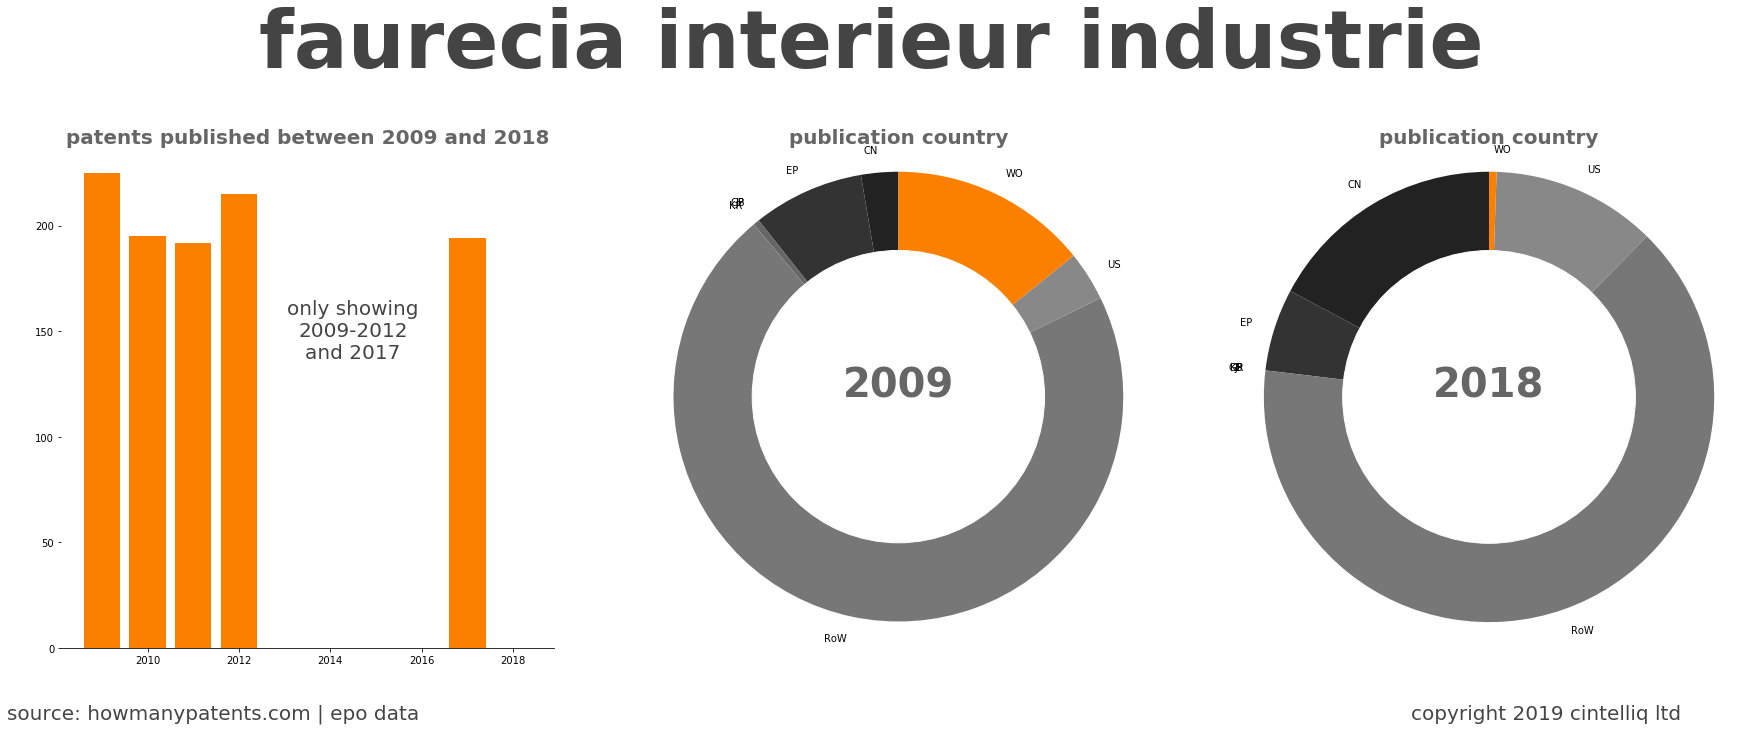 summary of patents for Faurecia Interieur Industrie